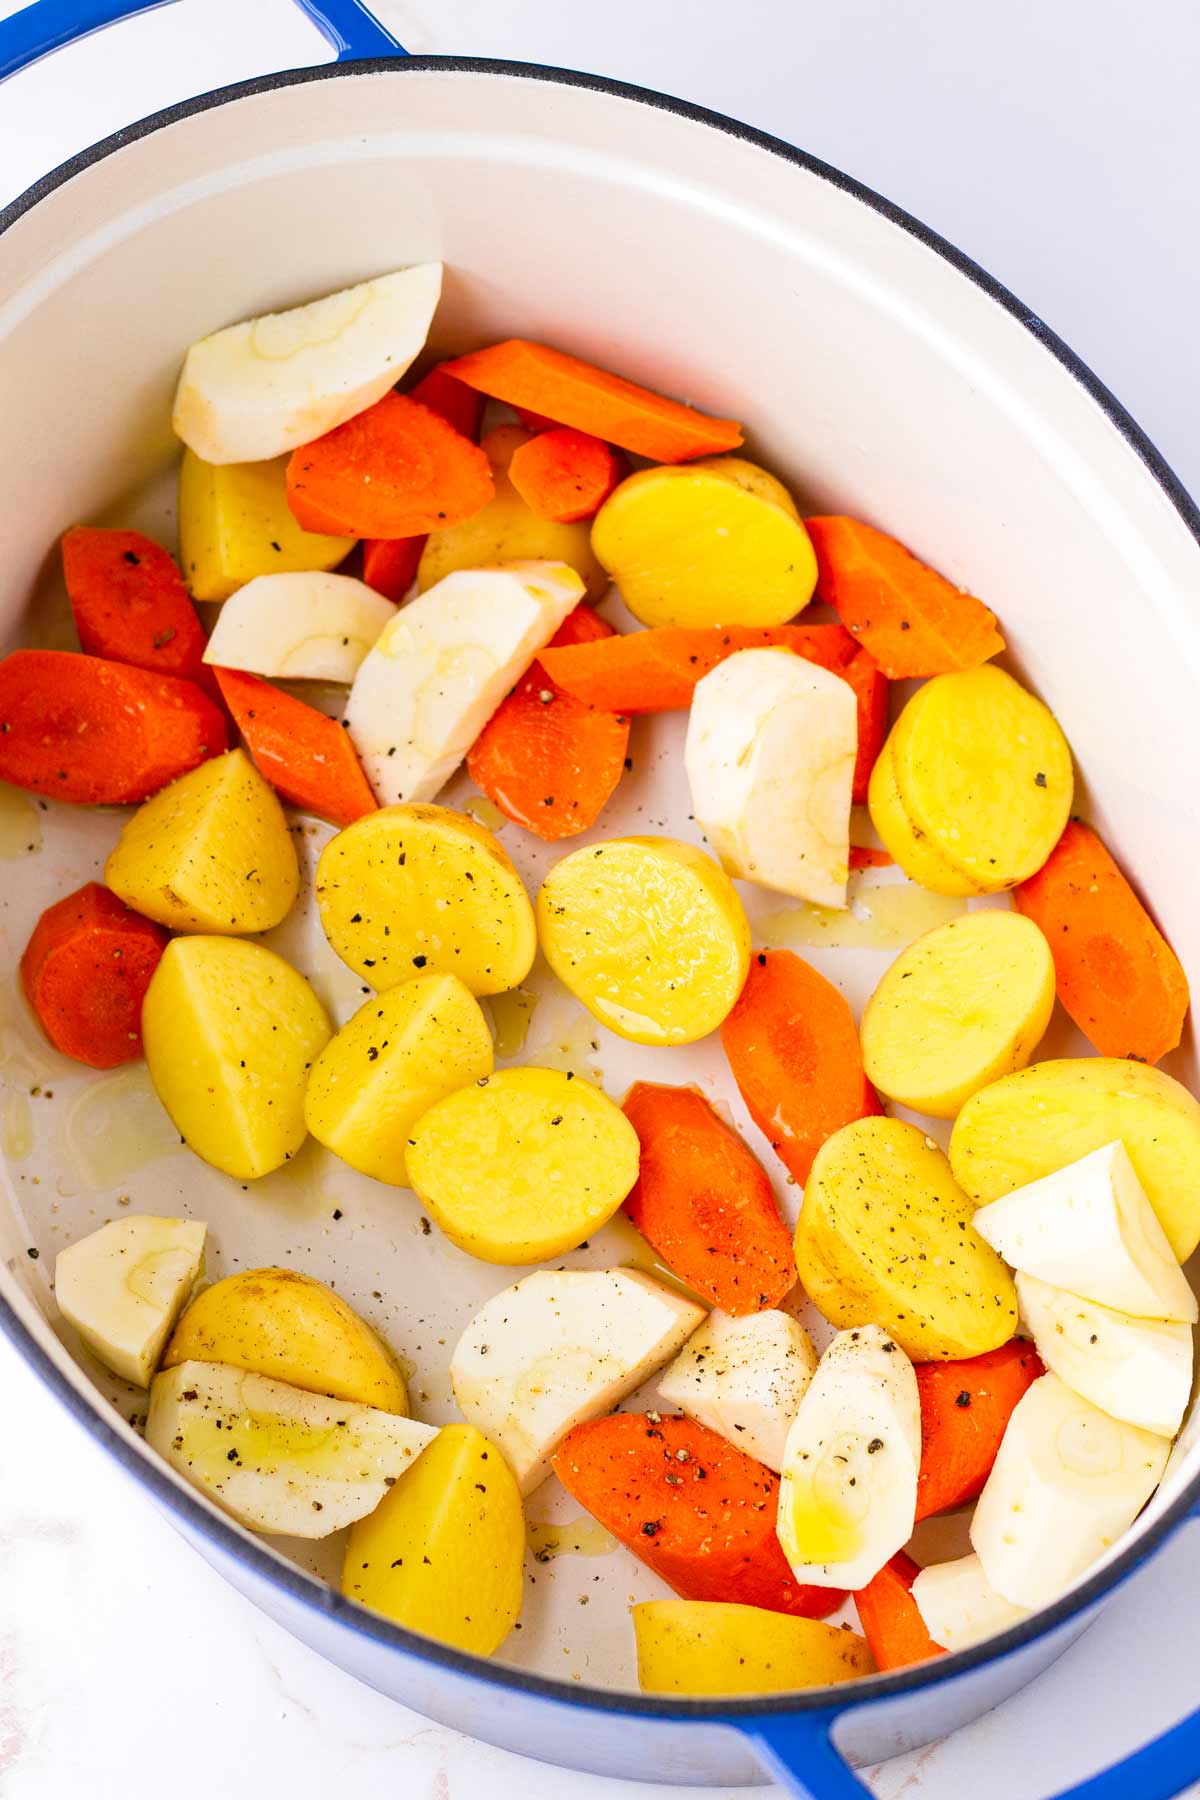 a bed of potatoes, parsnips, and carrots inside a blue dutch oven